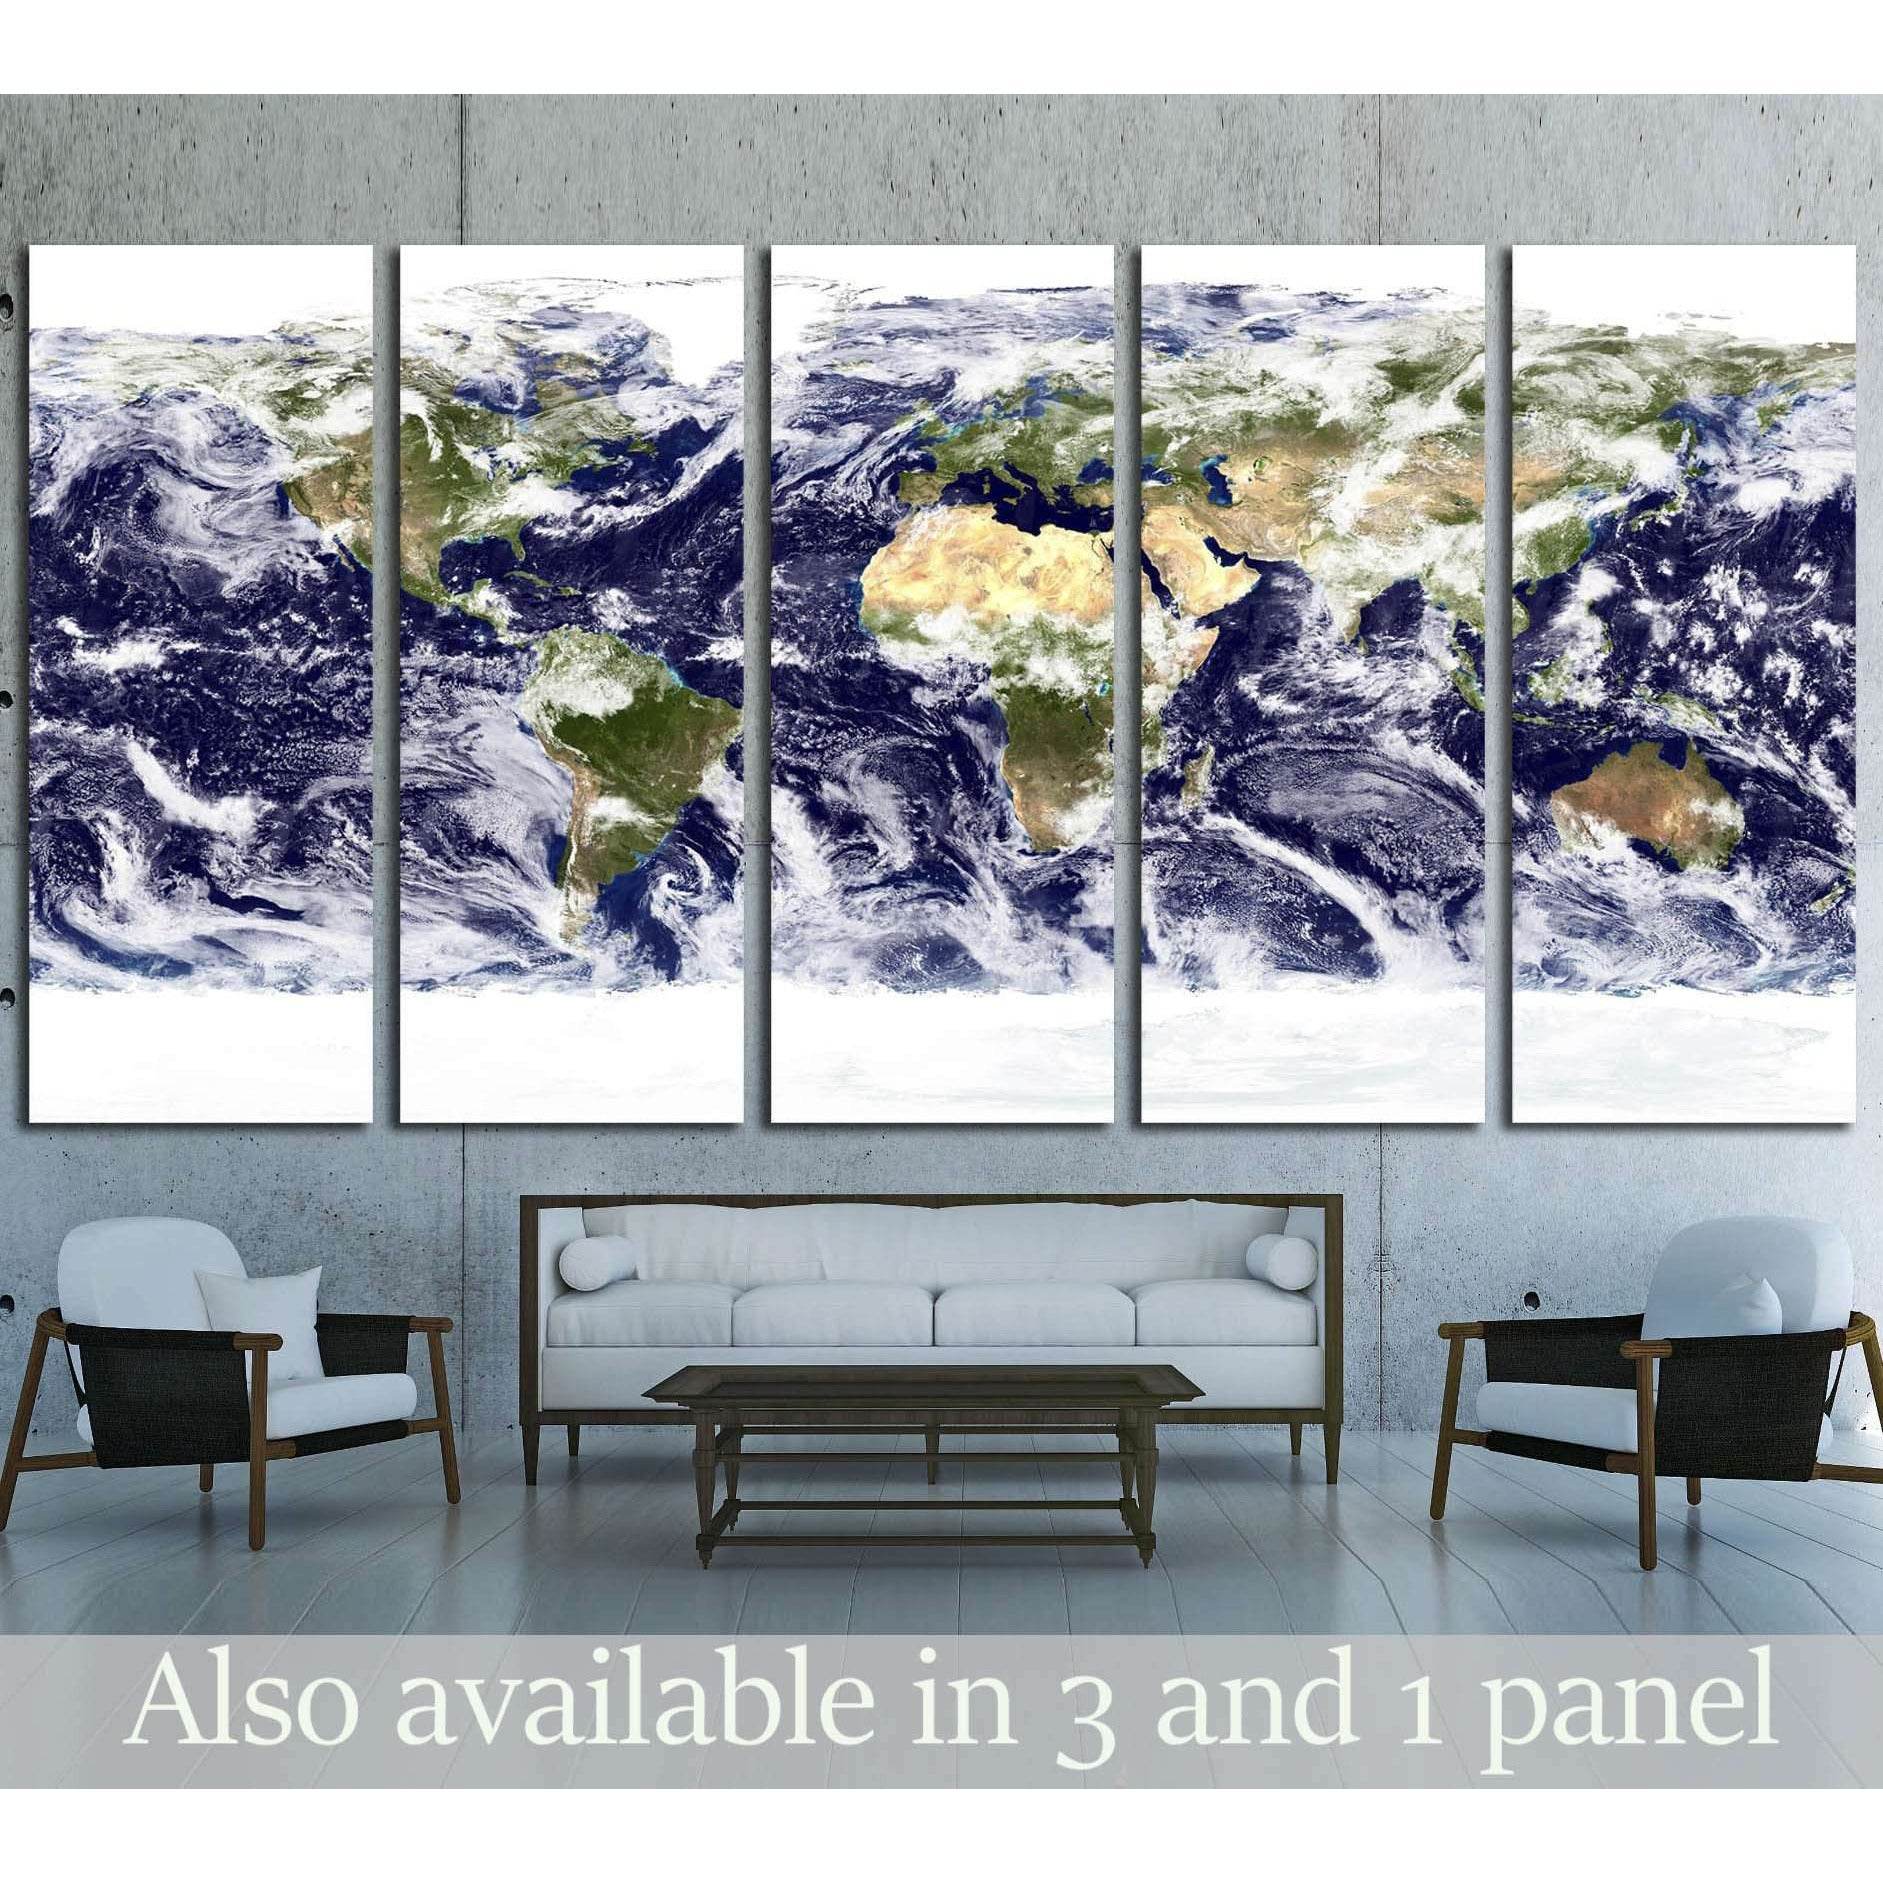 World Map №1500 Ready to Hang Canvas Print